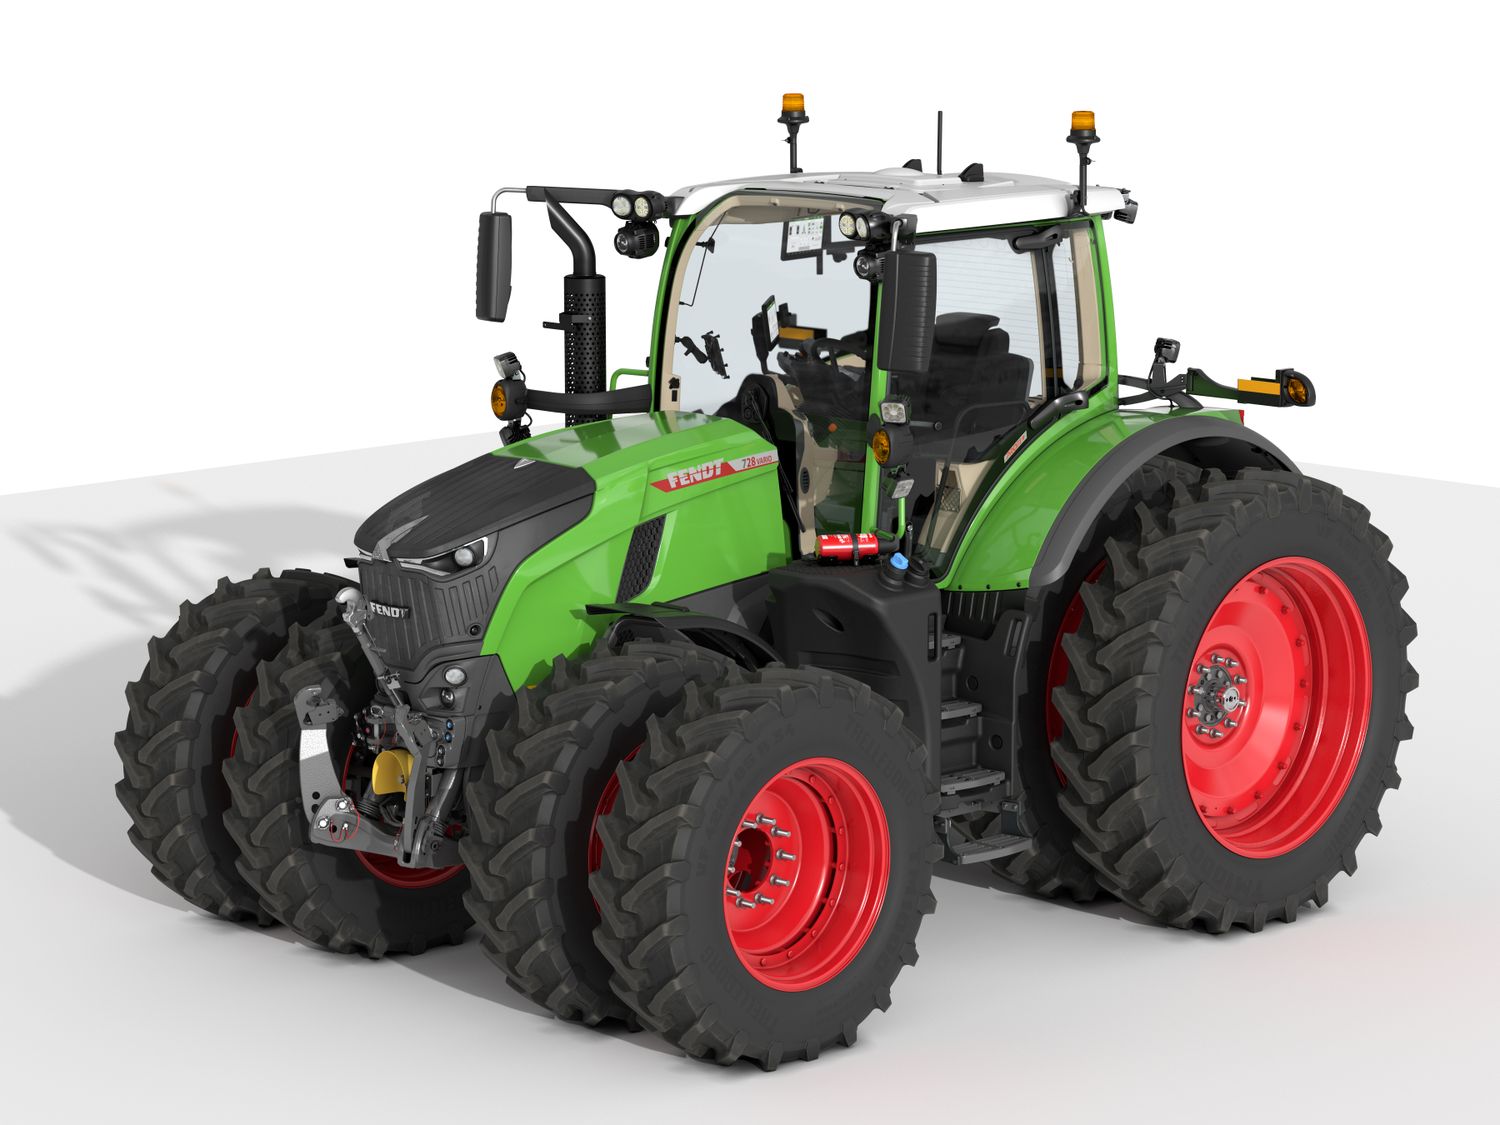 AGCO’s Fendt® Launches the New 700 Vario® Series to North America to Provide Customers with Even More Capability